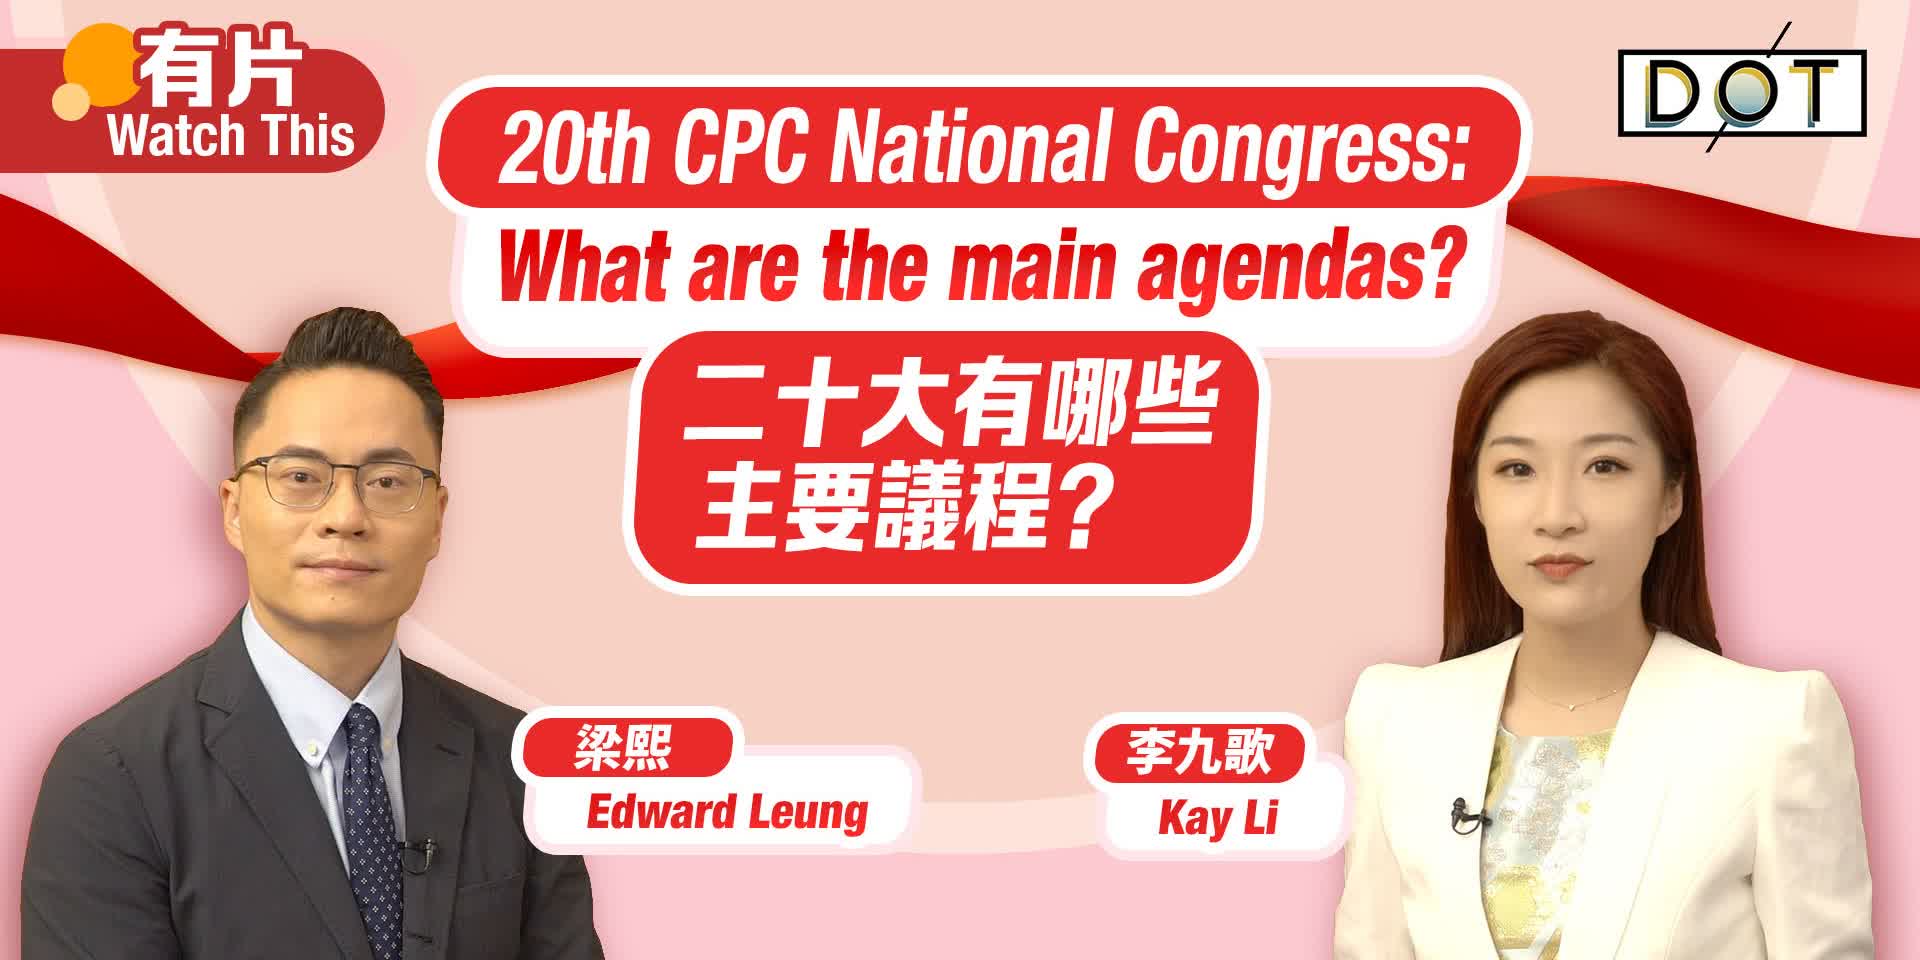 Watch This | 20th CPC National Congress: What are the main agendas?